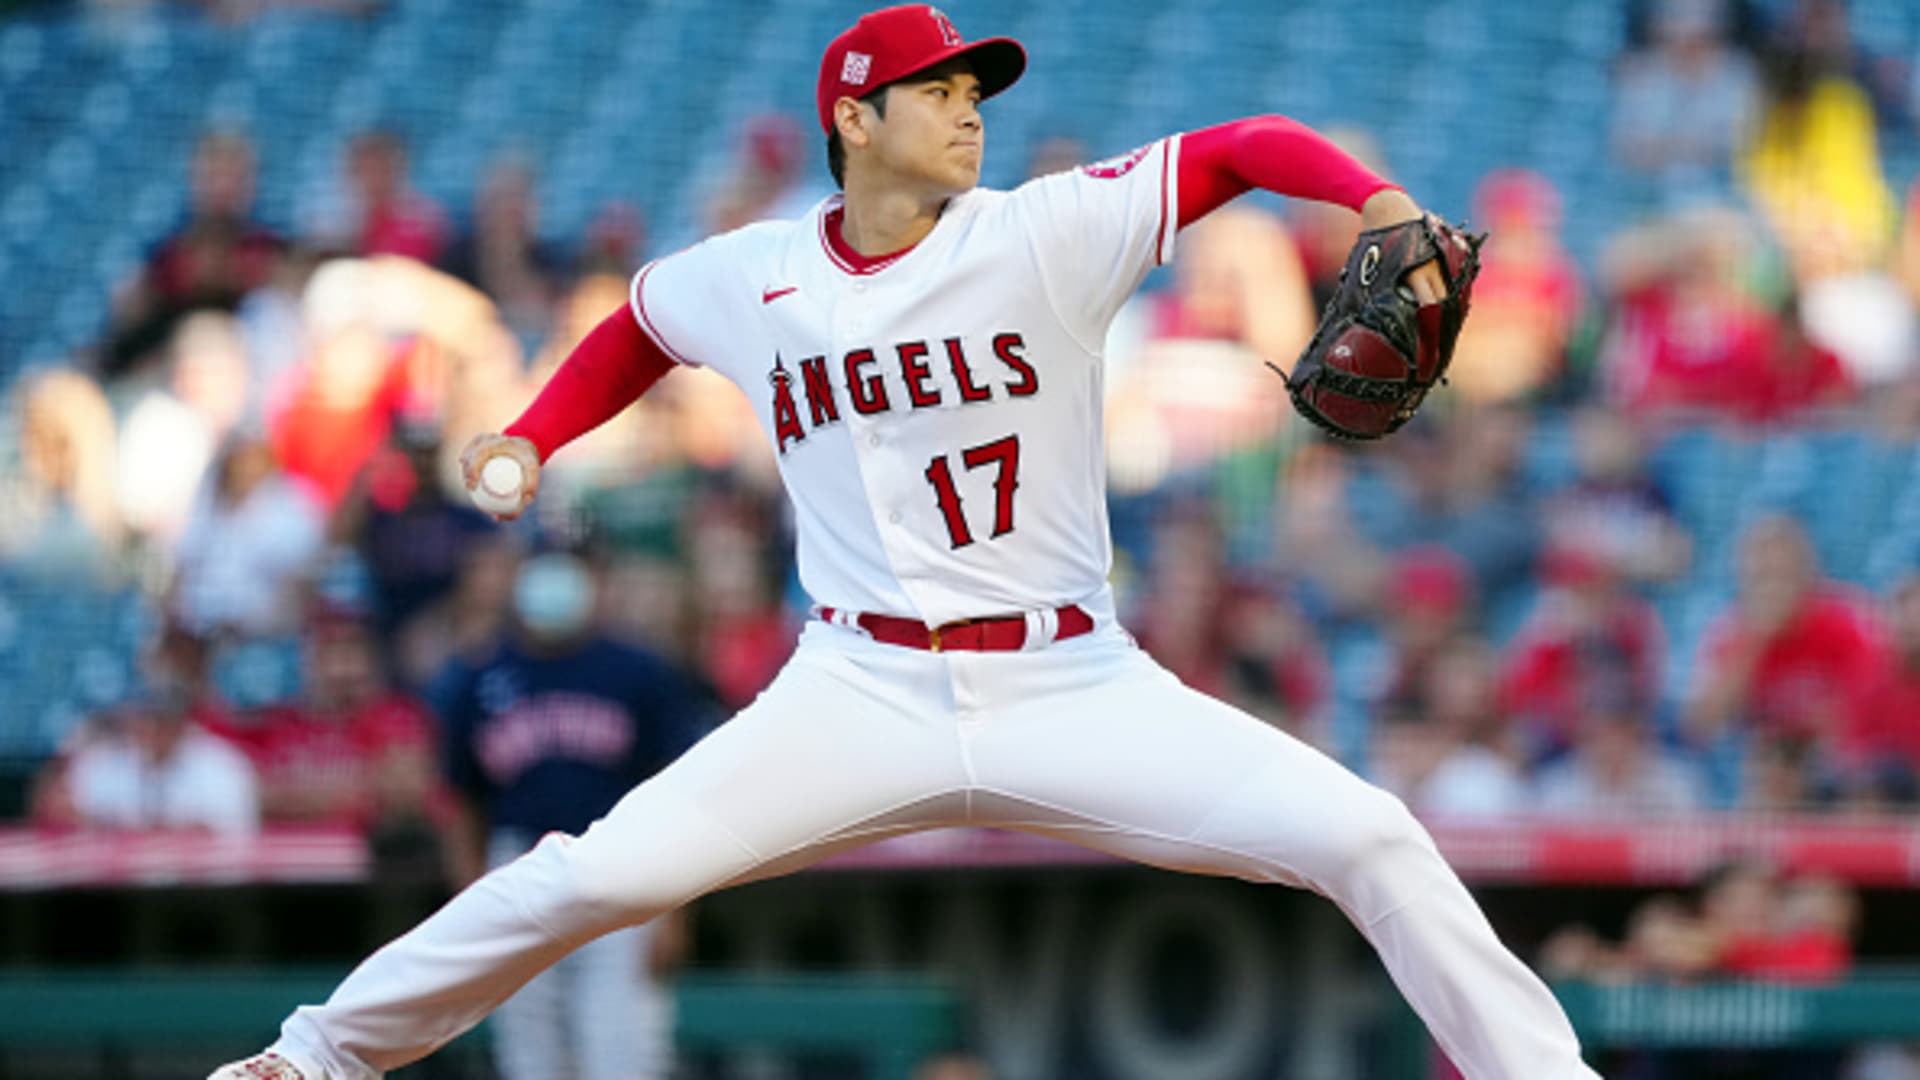 Shohei Ohtani #17 of the Los Angeles Angels pitches during the game between the Boston Red Sox and the Los Angeles Angels at Angel Stadium on Tuesday, July 6, 2021 in Anaheim, California.